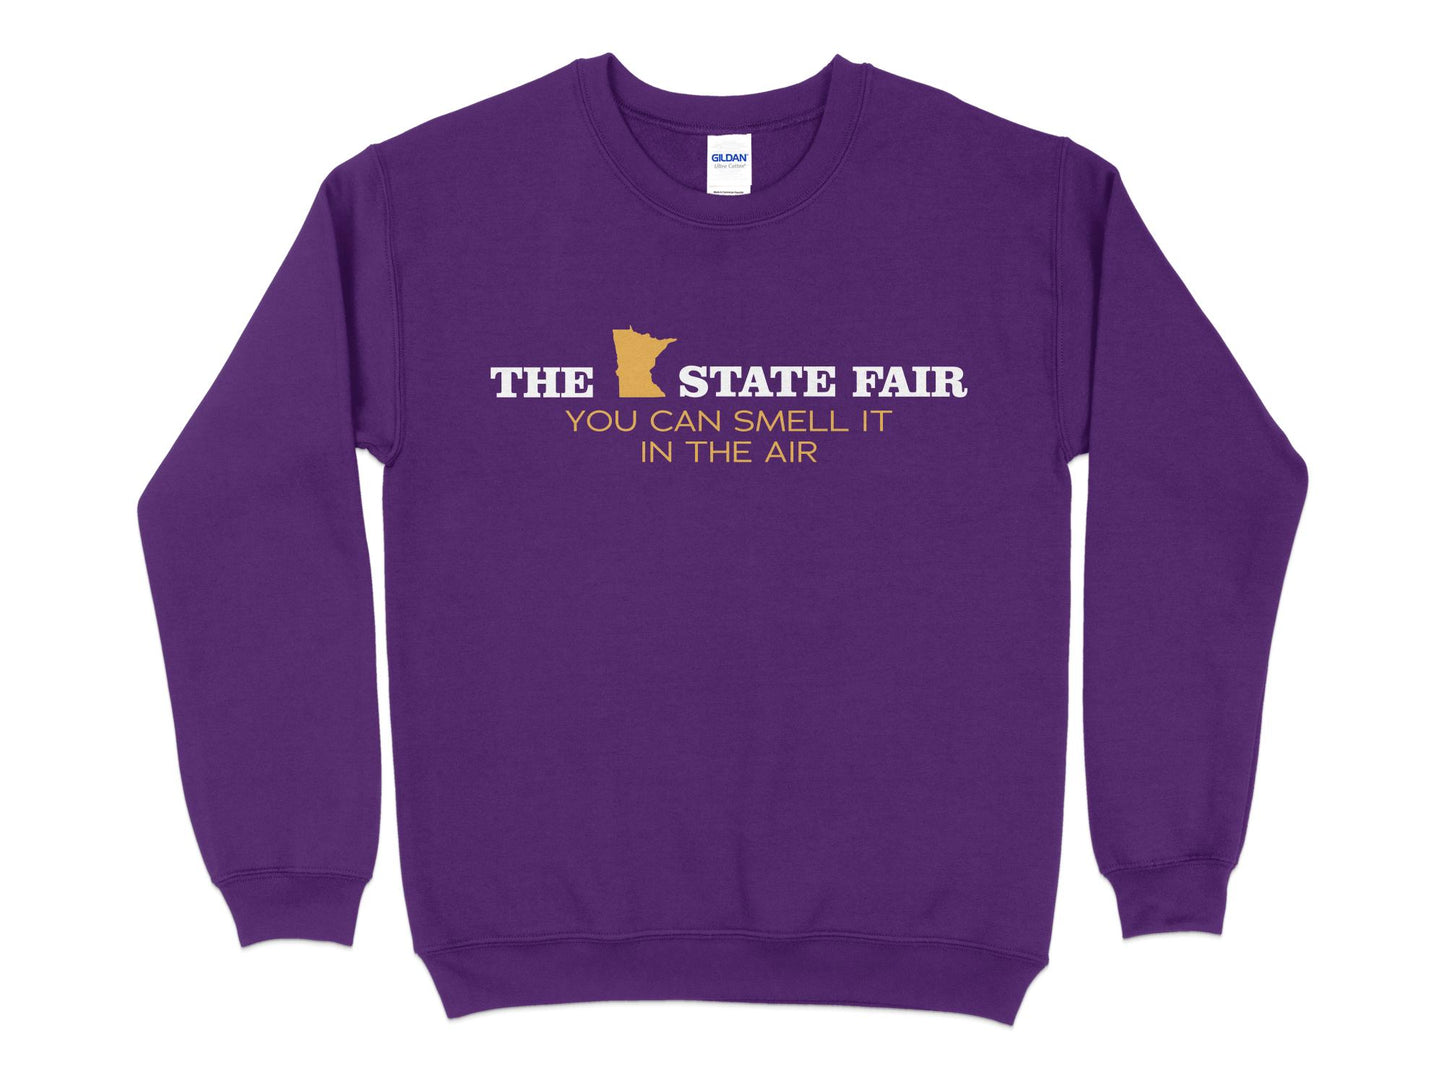 Minnesota State Fair Sweatshirt - You Can Smell It in the Air, purple